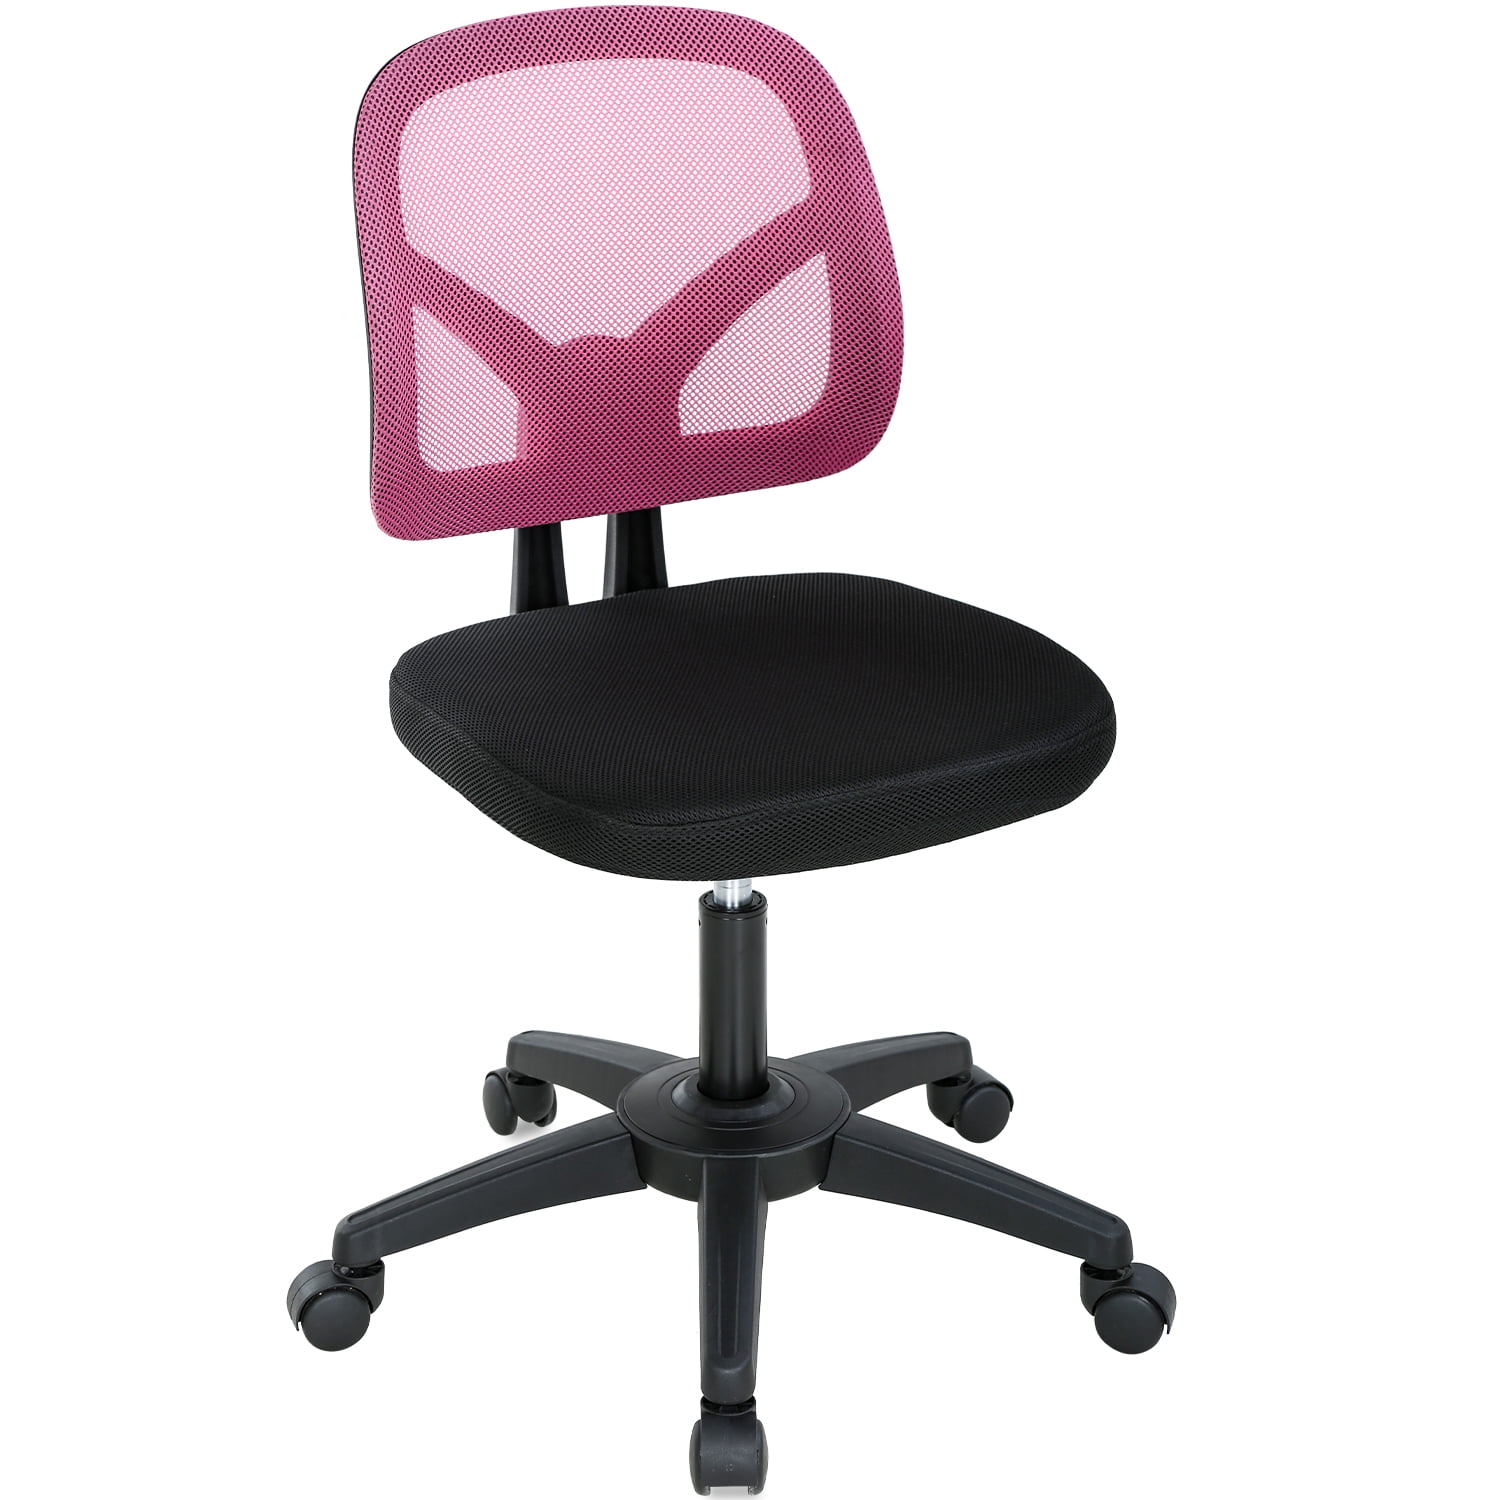 cute desk chairs for girls